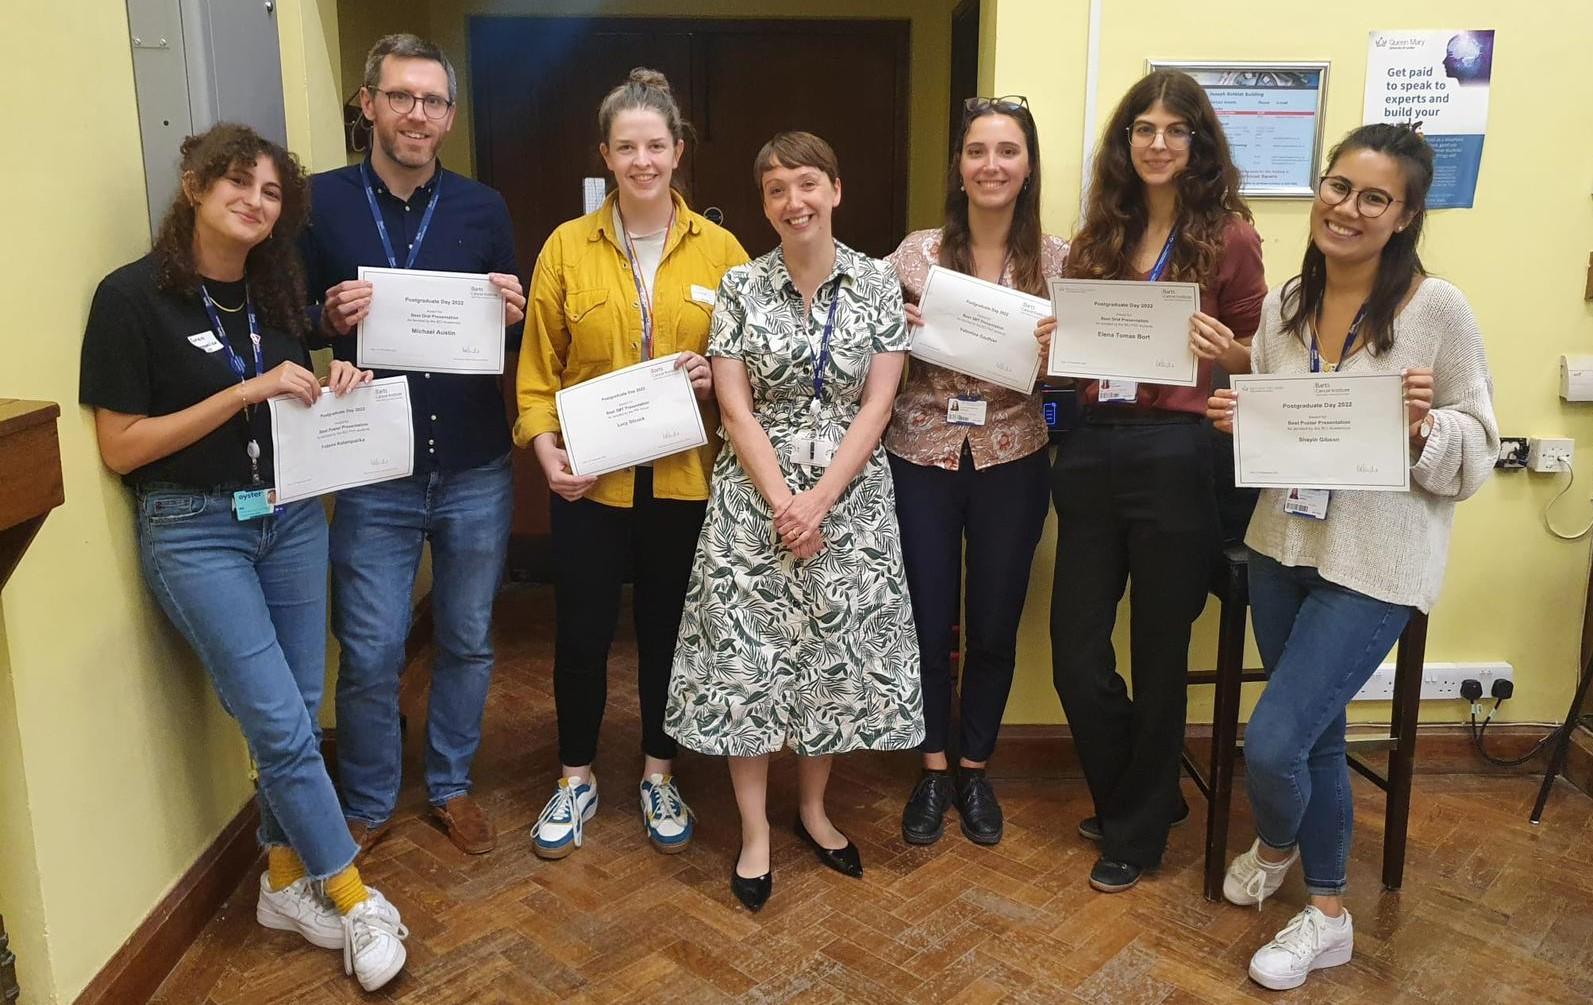 PhD students standing in a row holding up their award certificates.